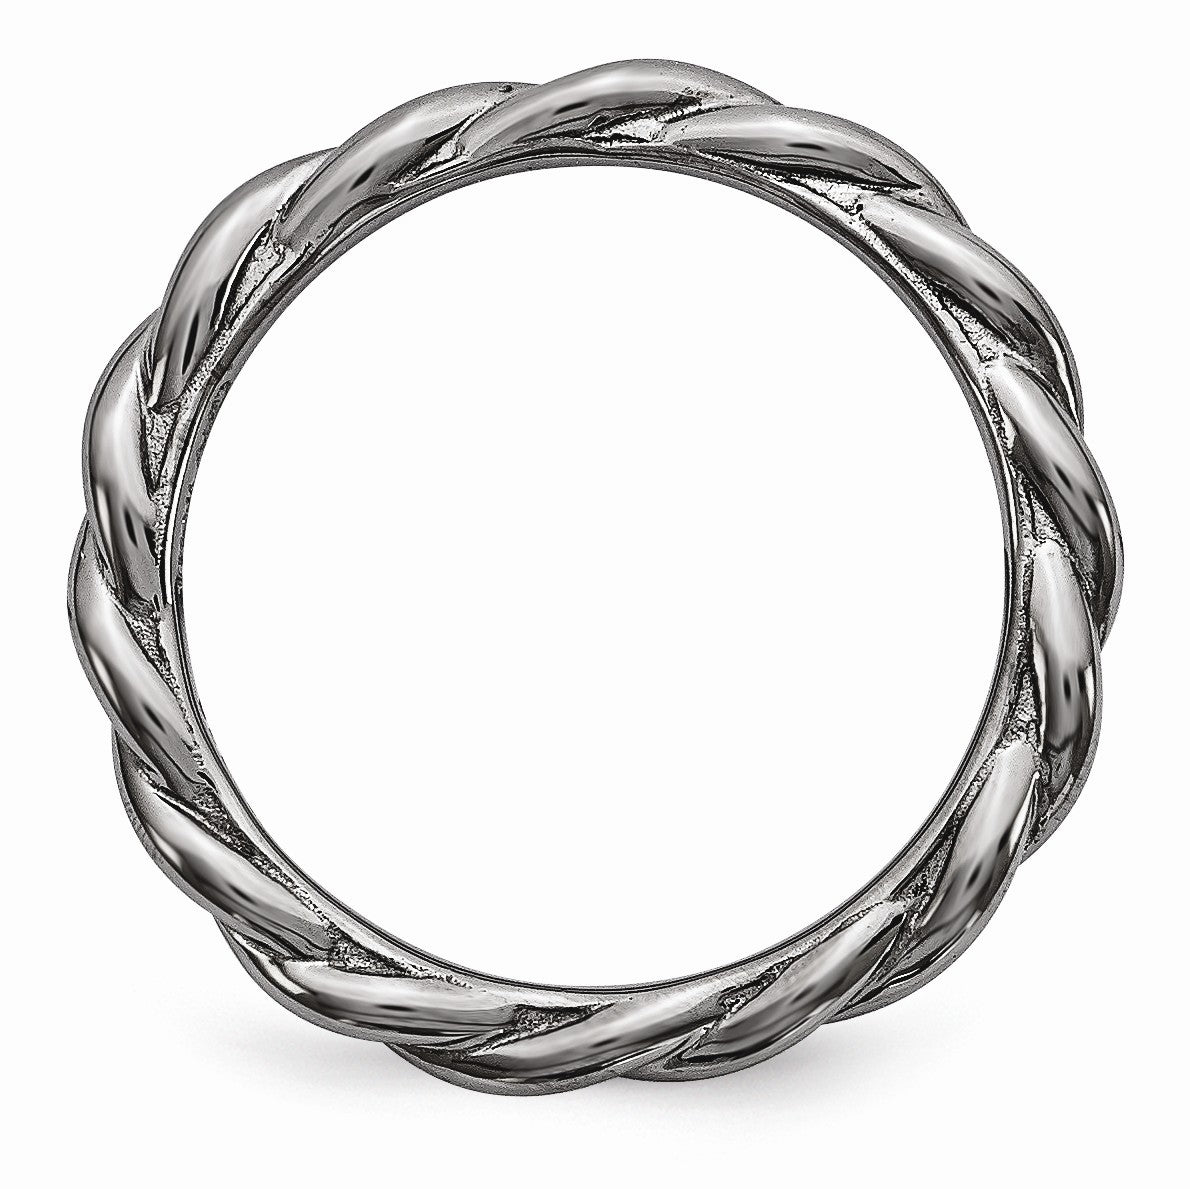 Alternate view of the 2.25mm Black Plated Sterling Silver Stackable Expressions Twist Band by The Black Bow Jewelry Co.